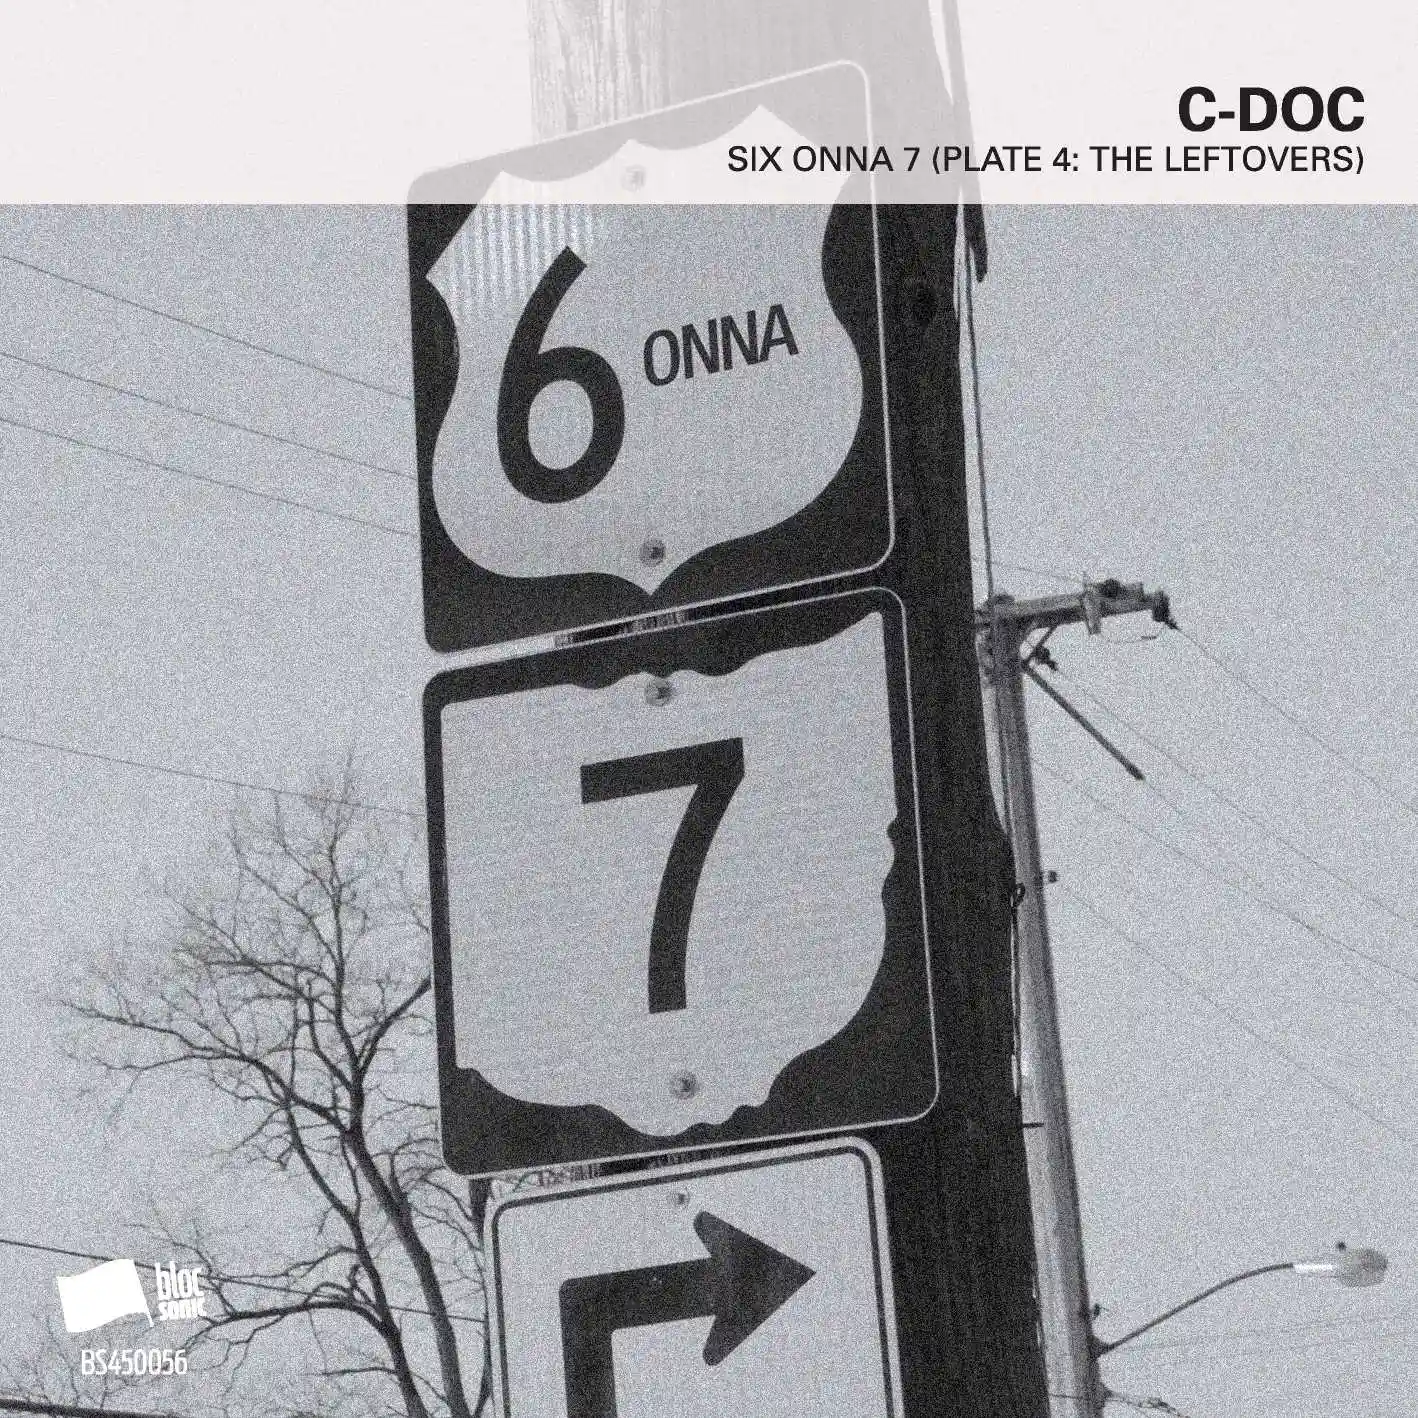 Album cover for “SIX ONNA 7 (Plate 4: The Leftovers)” by C-Doc